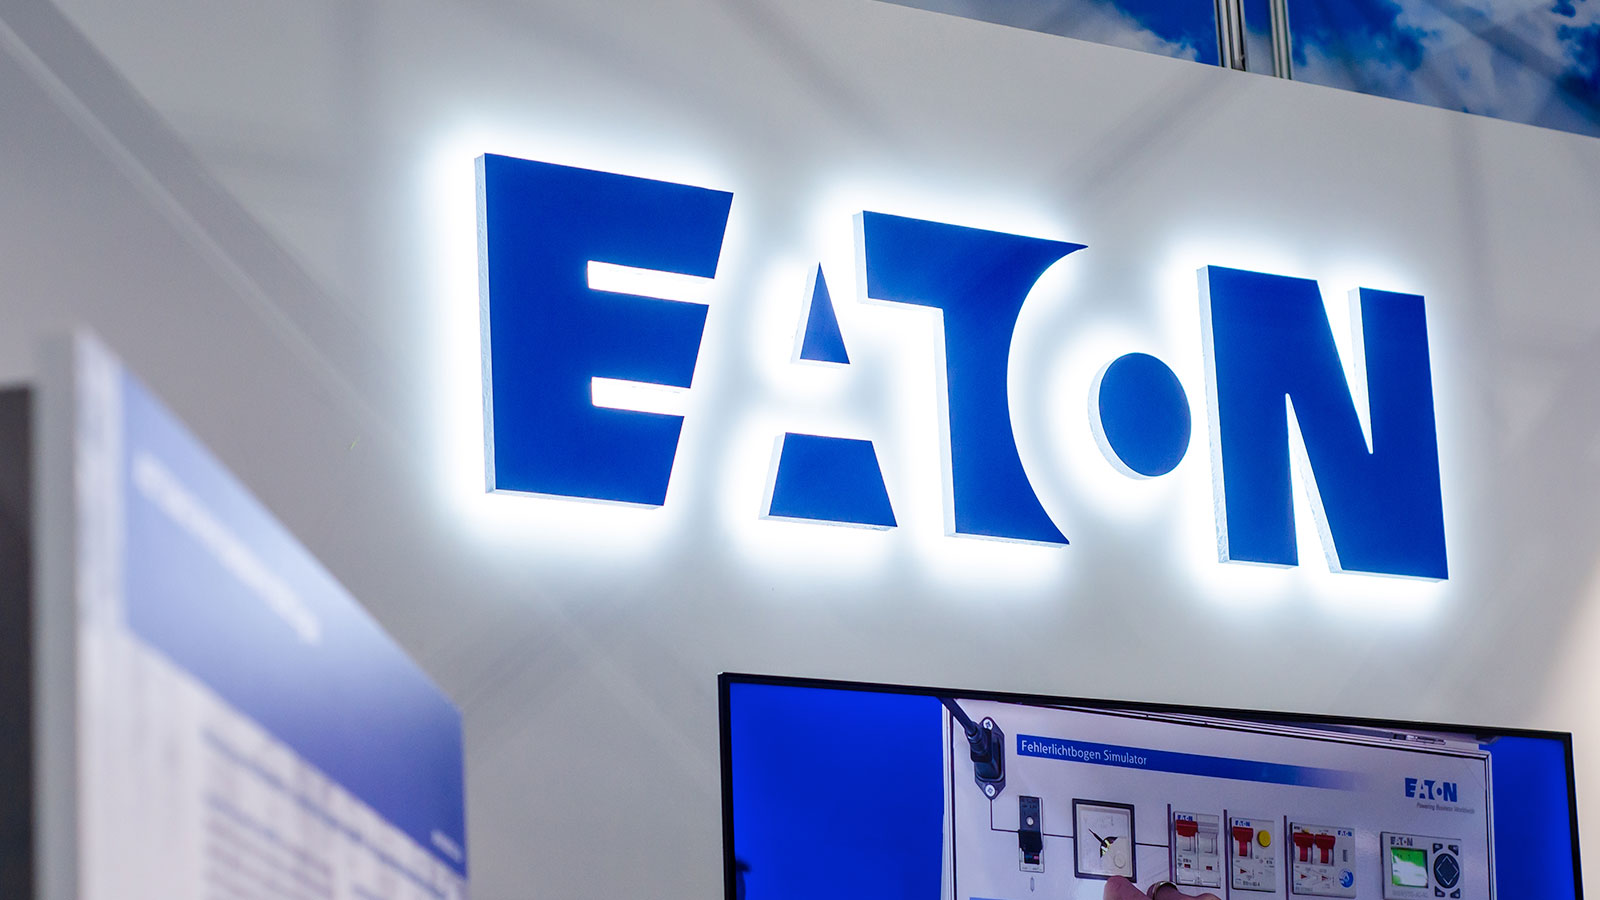 Eaton logo on stand at exhibition.